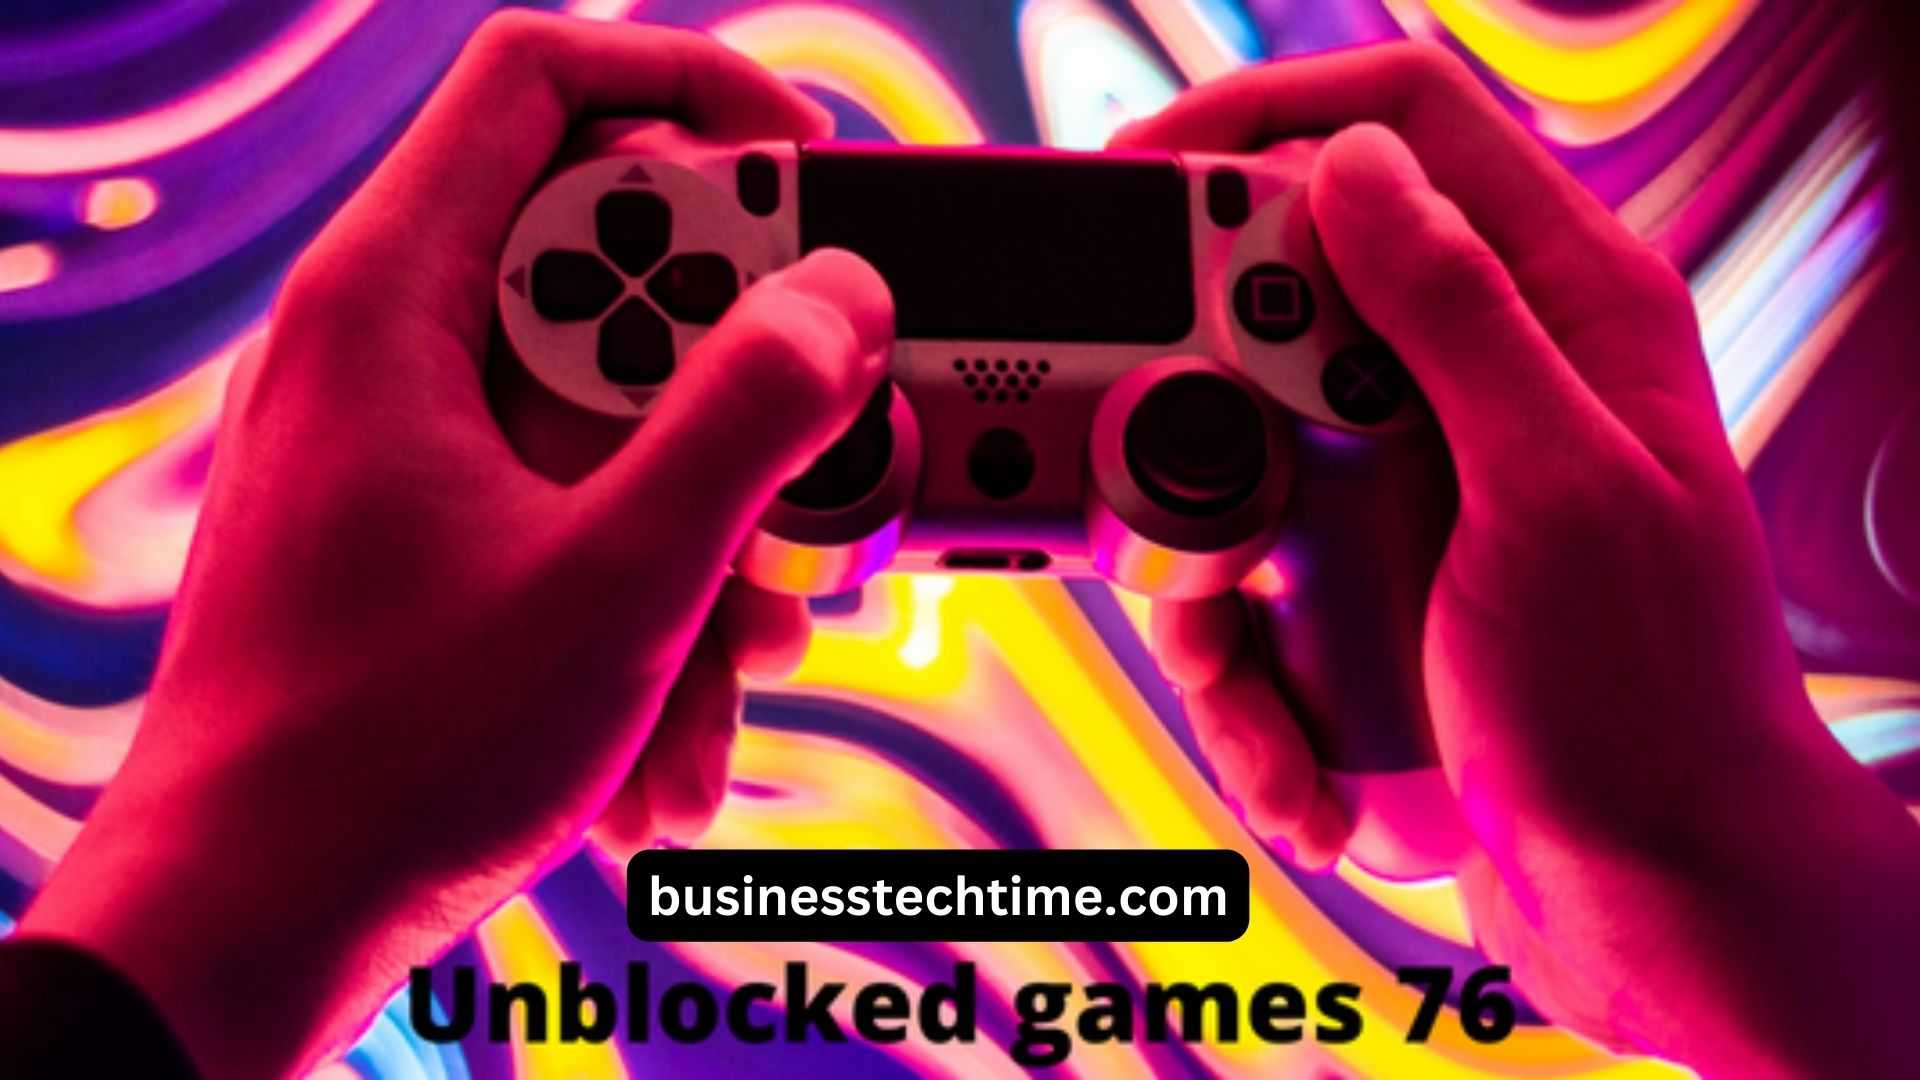 Unblocked Games 76: A Fun and Safe Way to Play Anywhere